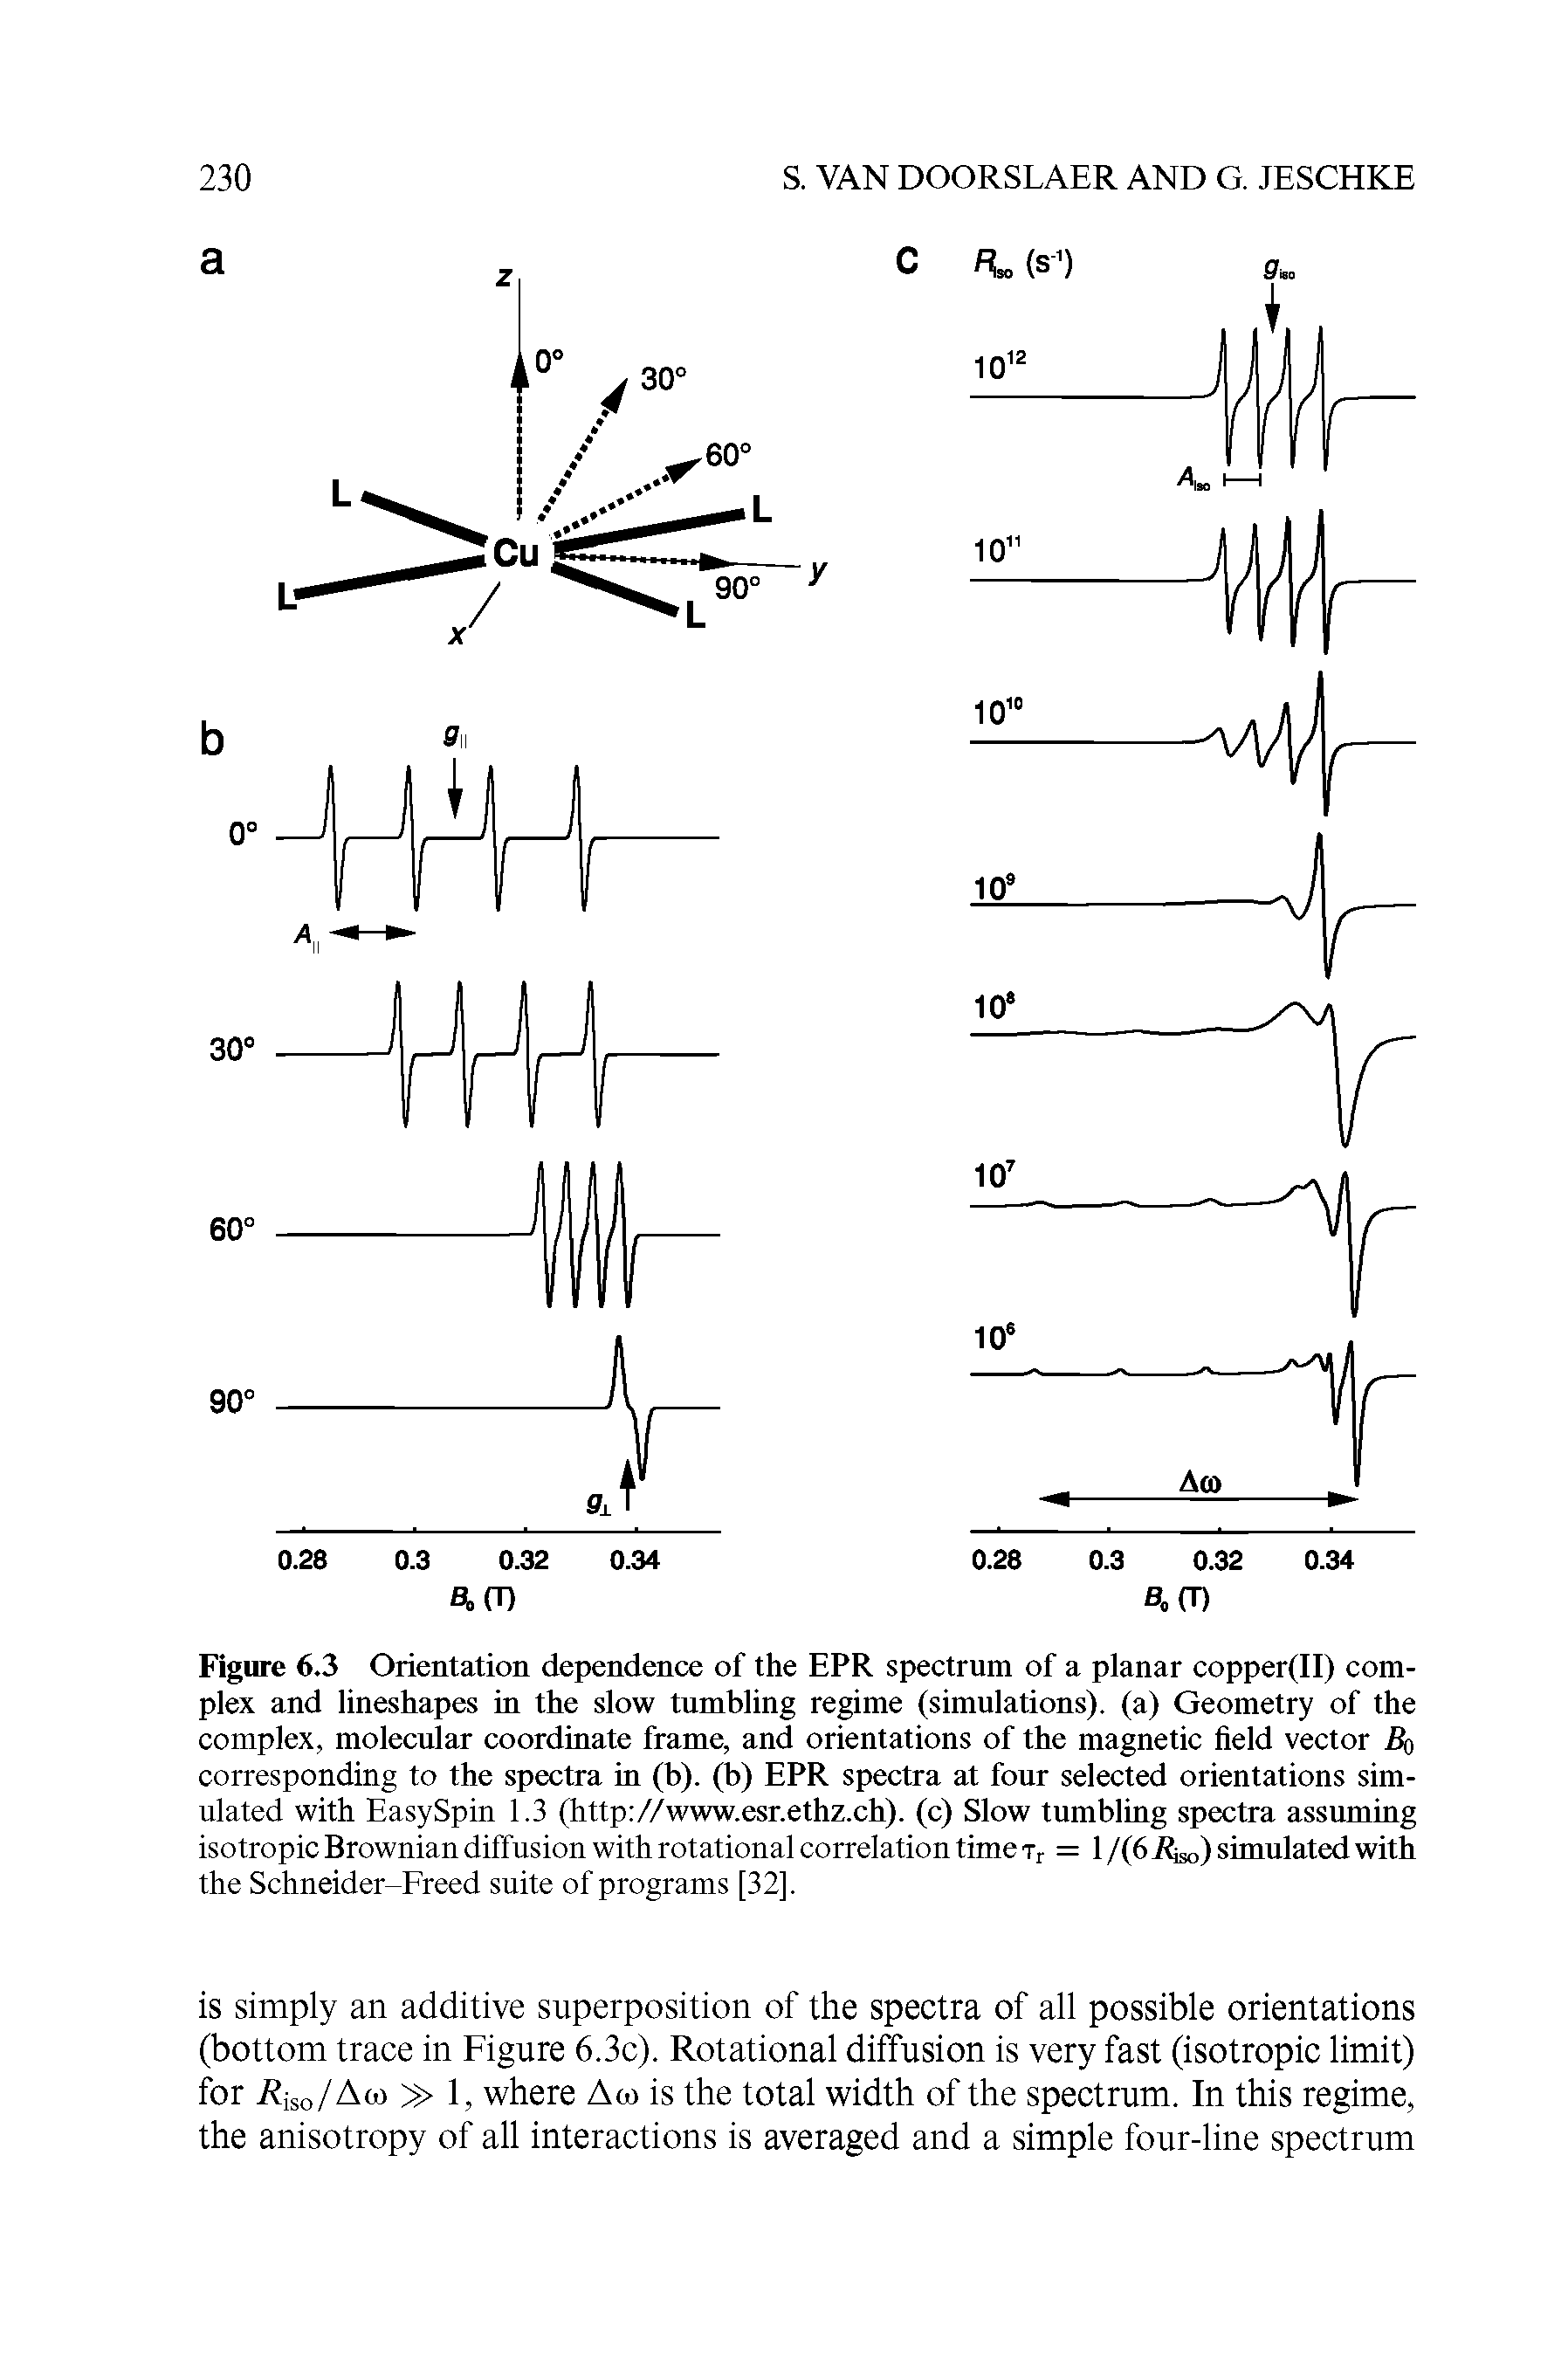 Figure 6.3 Orientation dependence of the EPR spectrum of a planar copper(II) complex and lineshapes in the slow tumbling regime (simulations), (a) Geometry of the complex, molecular coordinate frame, and orientations of the magnetic field vector Bo corresponding to the spectra in (b). (b) EPR spectra at four selected orientations simulated with EasySpin 1.3 (http //www.esr.ethz.ch). (c) Slow tumbling spectra assuming isotropic Brownian diffusion with rotational correlation time Tr = 1 /(6 2 ) simulated with the Schneider-Freed suite of programs [32].